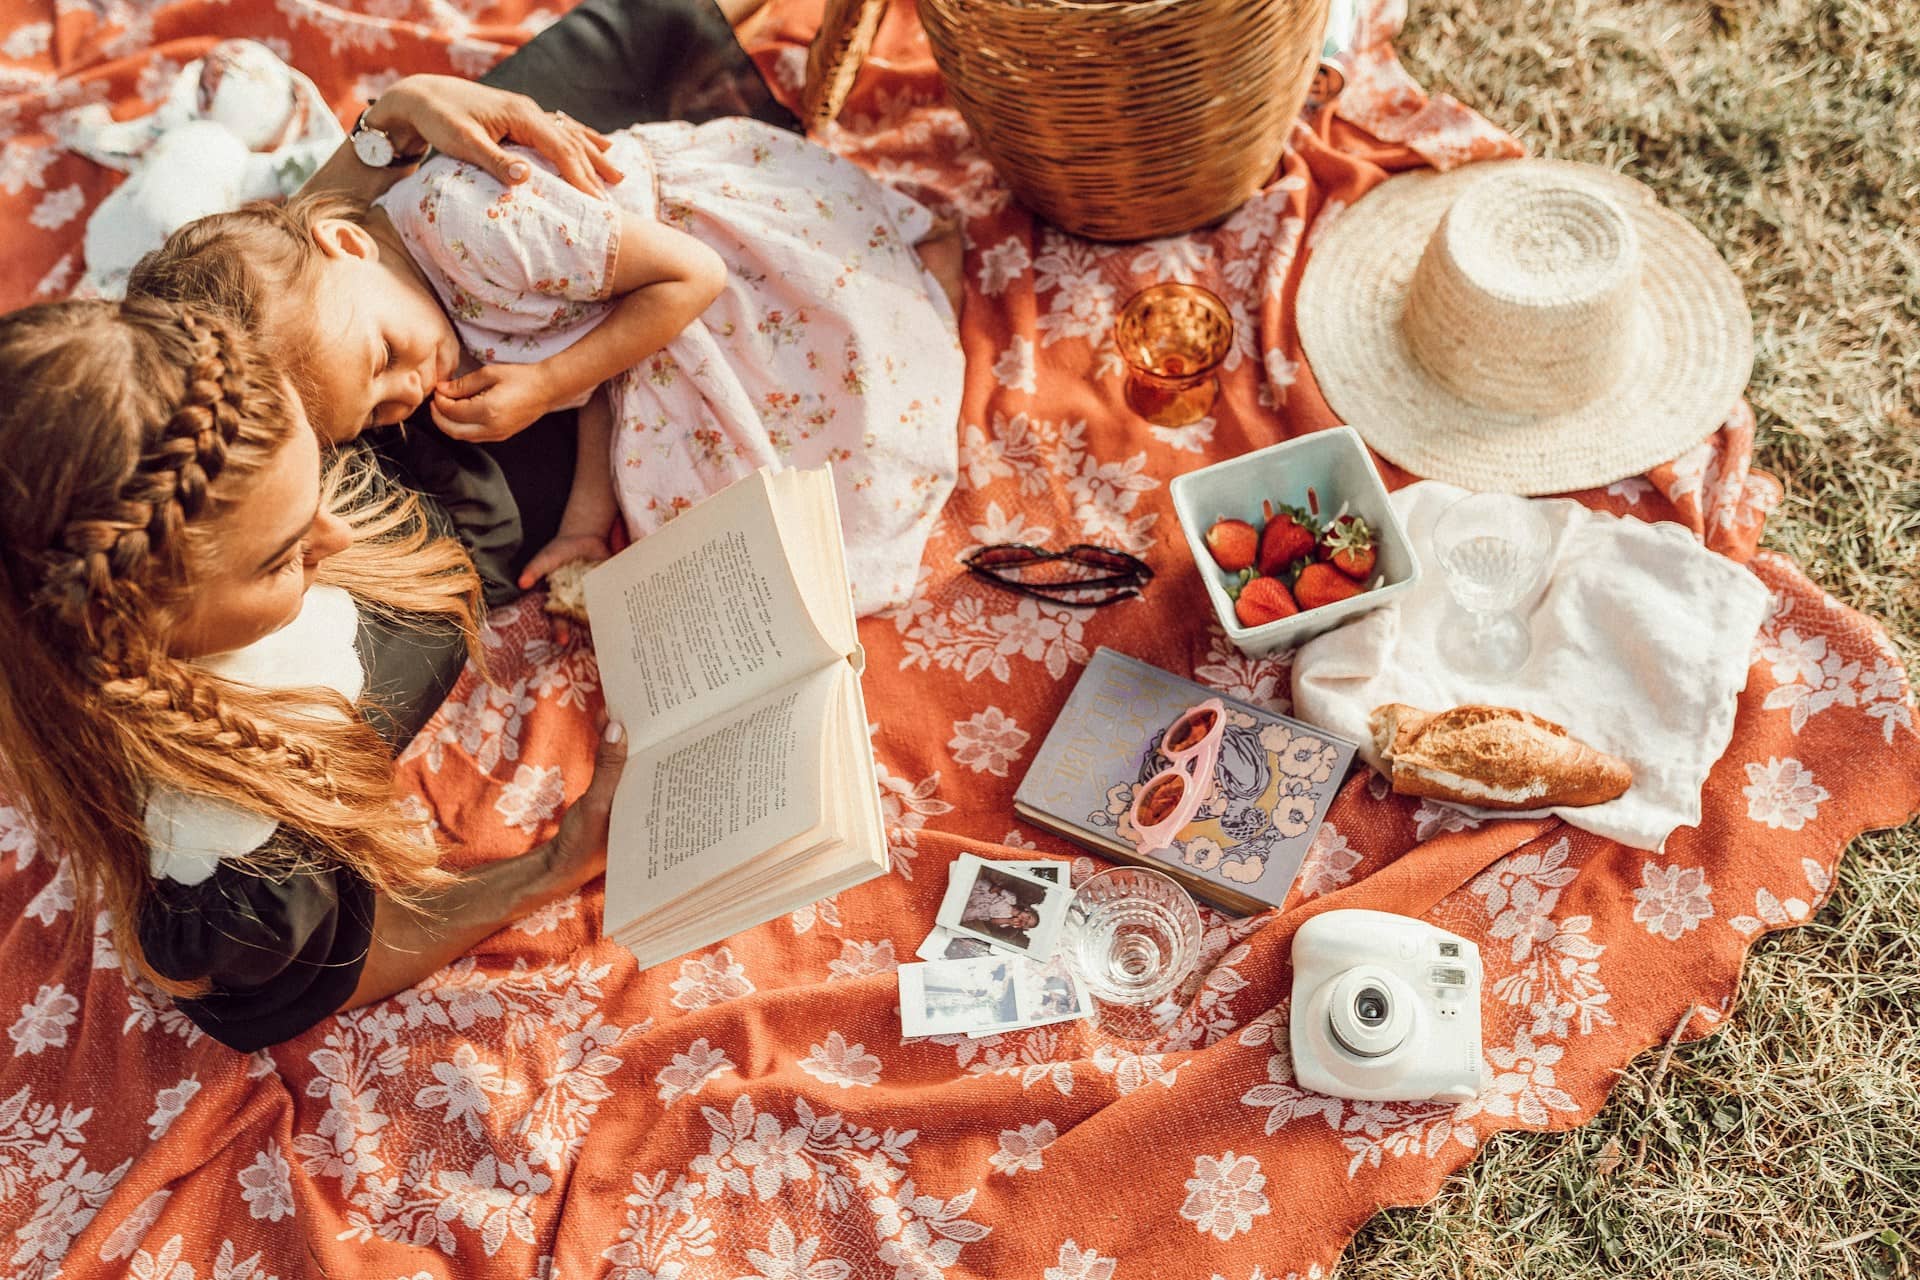 A woman is reading to a child while having a picnic